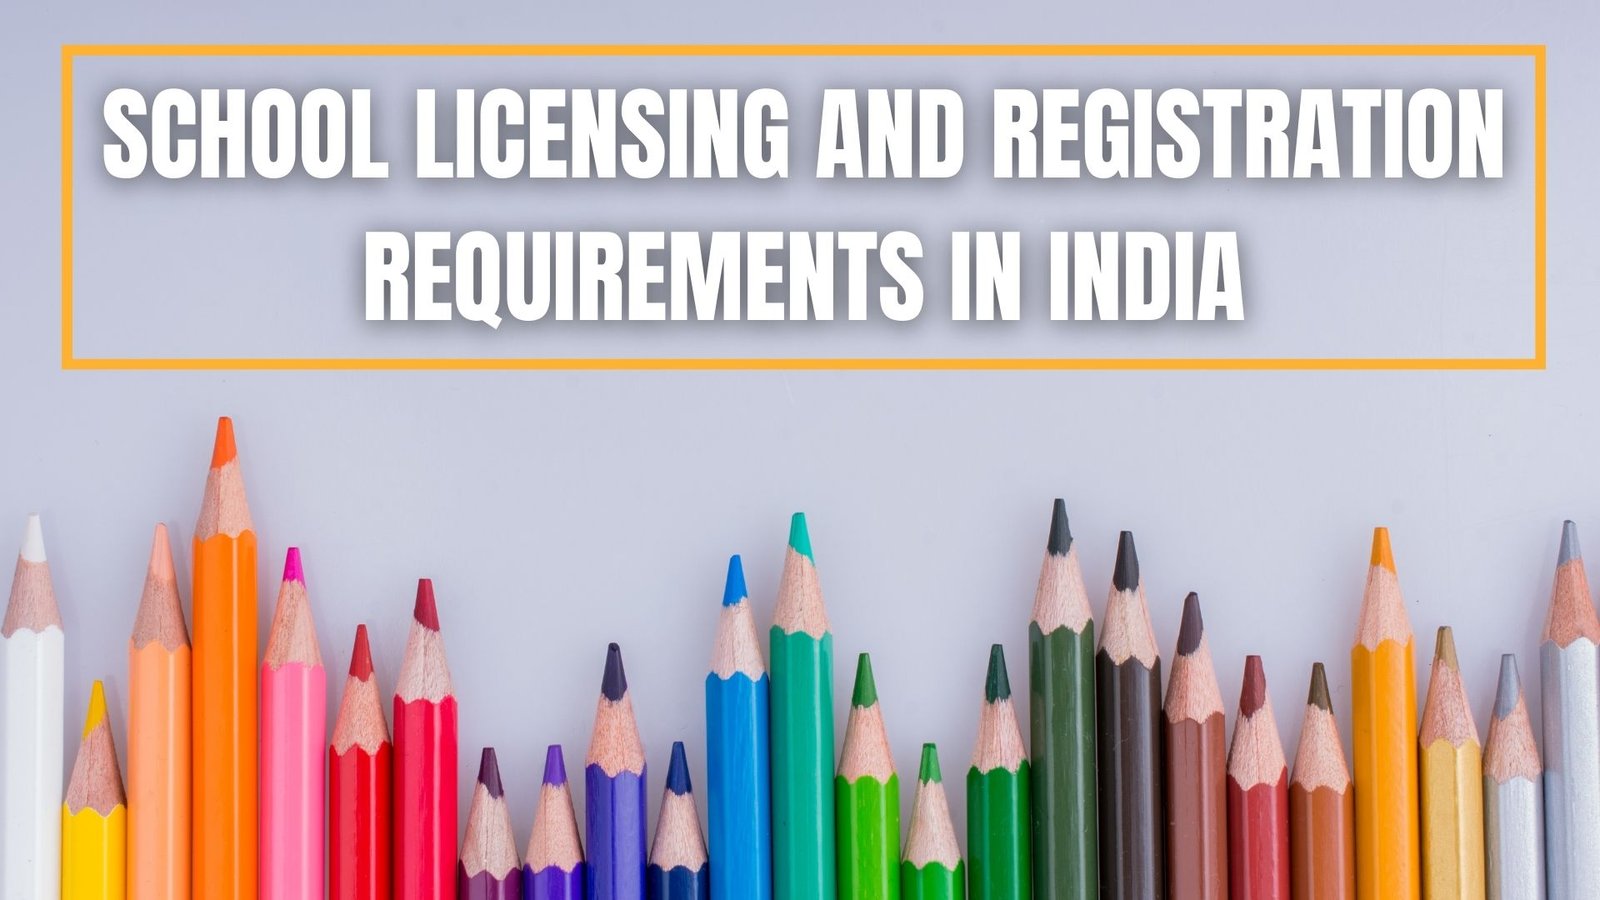 School Licensing and Registration Requirements in India, Lawforeverything